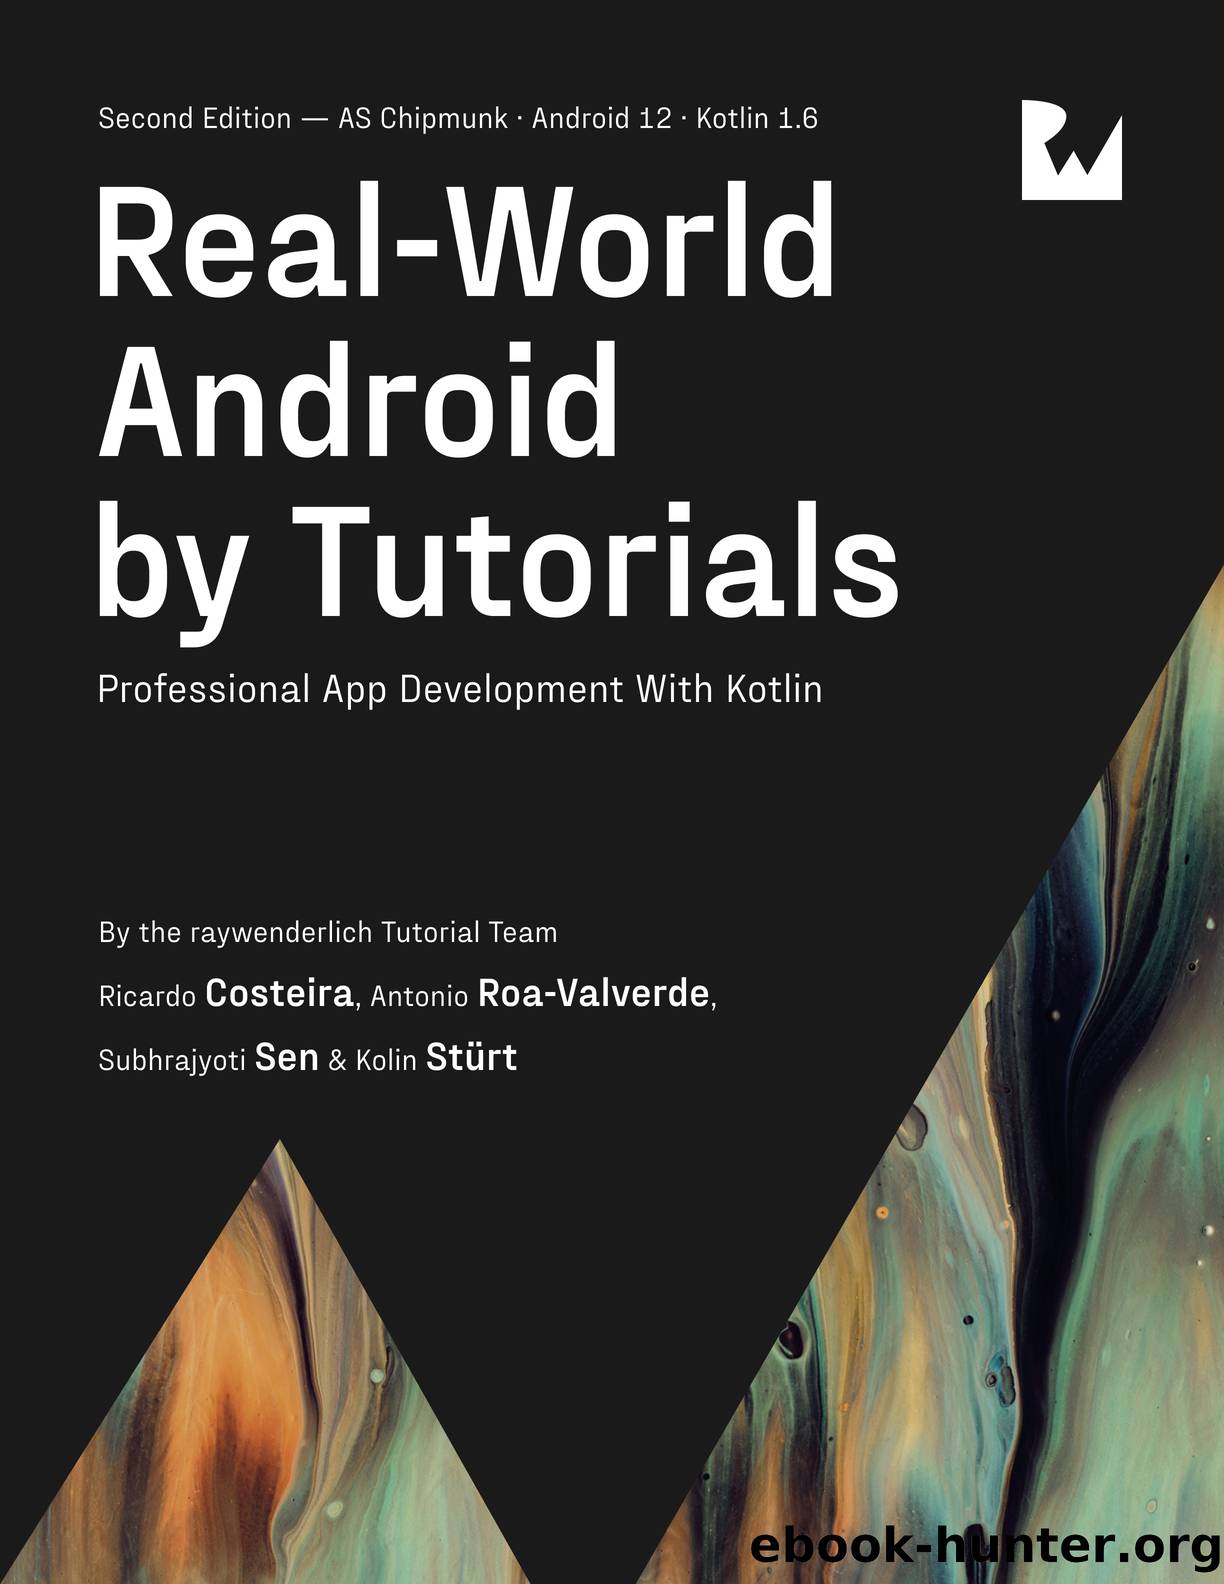 Real-World Android by Tutorials by By Ricardo Costeira & By Subhrajyoti Sen & By Kolin Stürt and Antonio Roa-Valverde